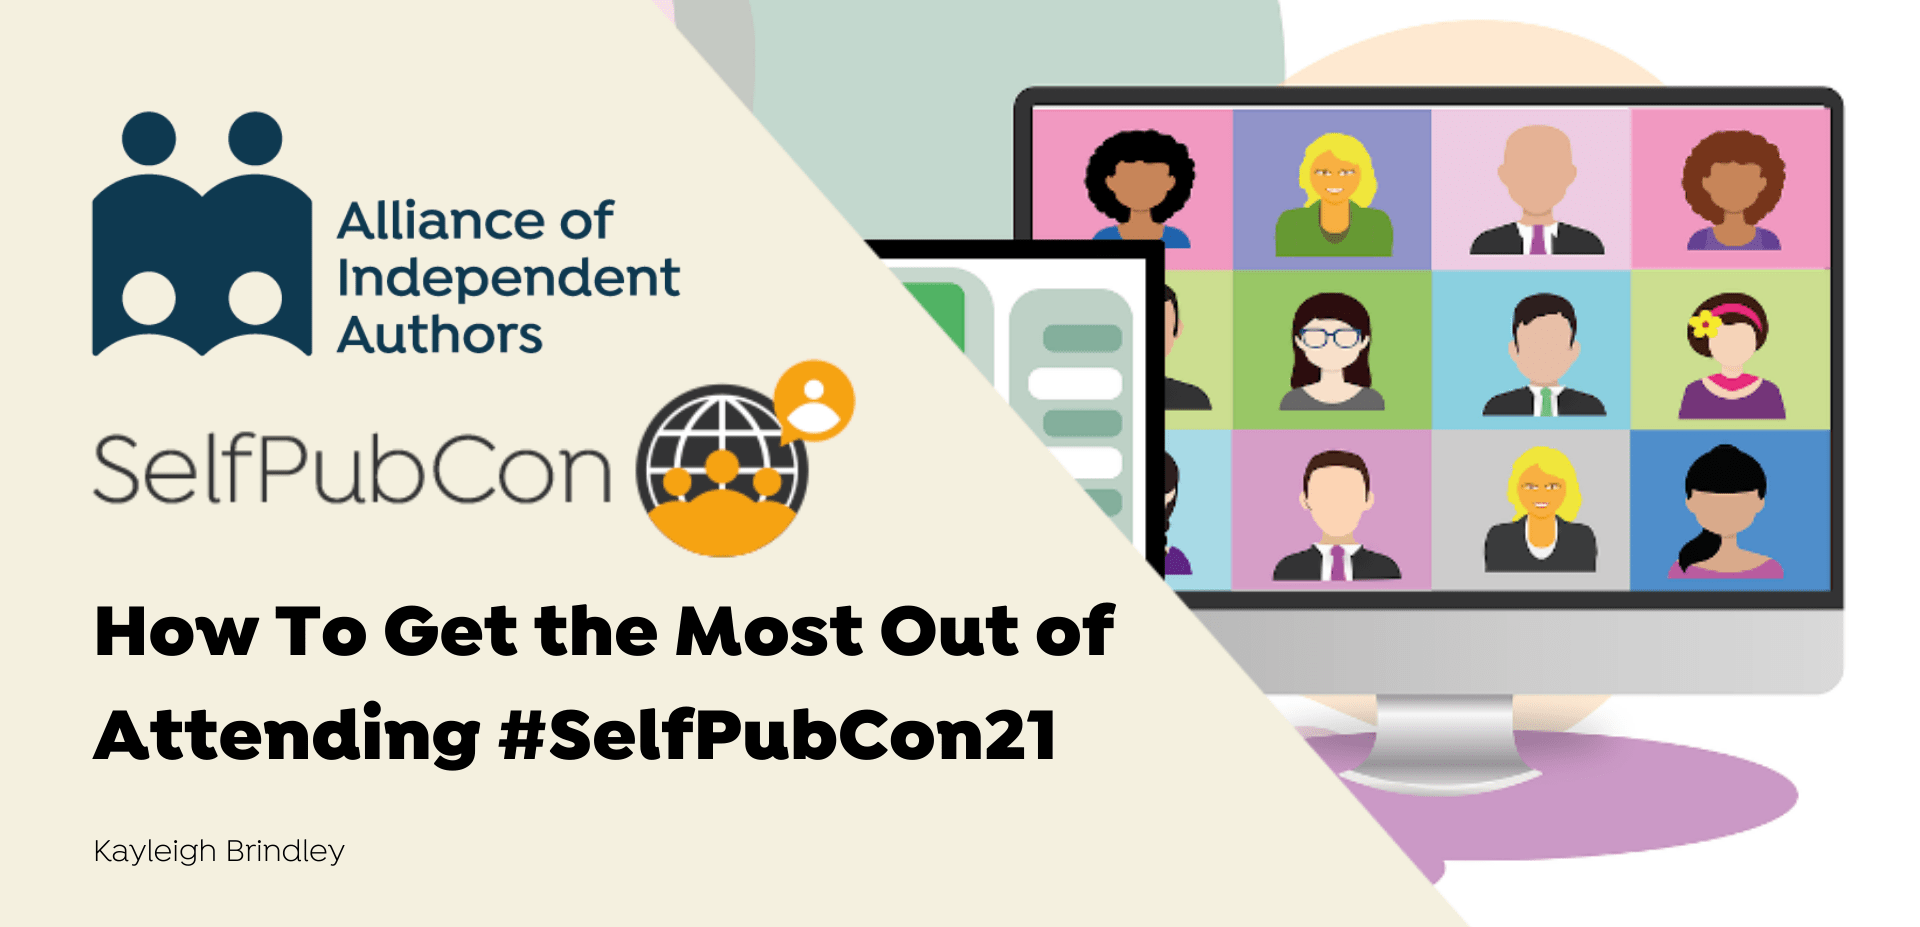 How To Make The Most Of SelfPubCon21